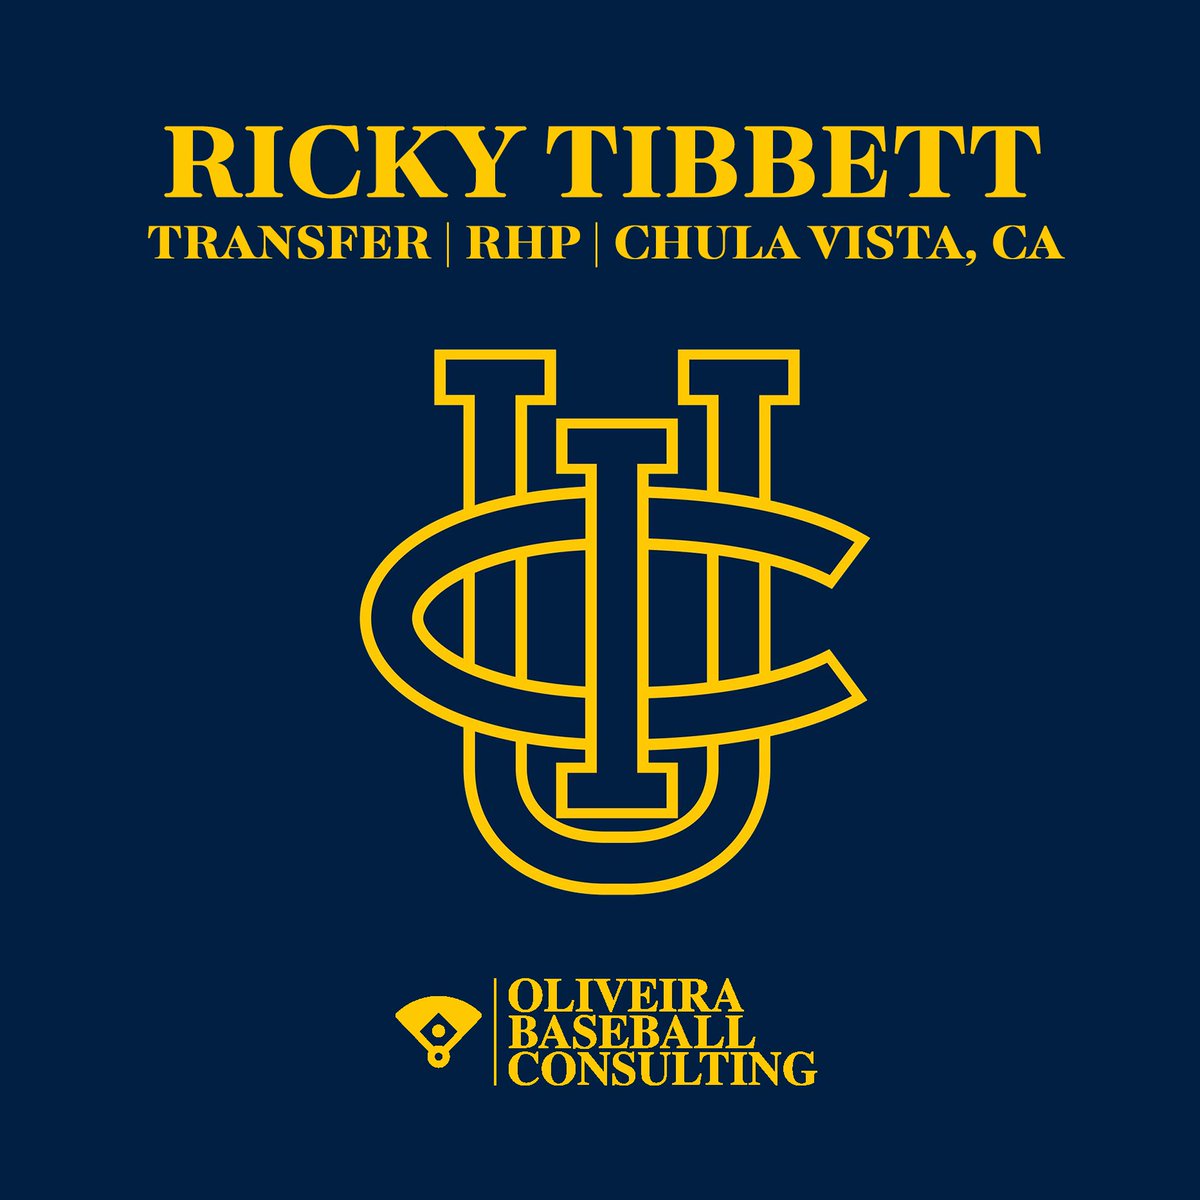 Congrats to Ricky Tibbett on his commitment to the University of California, Irvine. The Anteaters picked up one of the more experienced arms in the country as a grad transfer. Pumped for him & his family #UCI #BigWest #EatersGottaEat #RipEm #TogetherWeZot #Committed #OBC